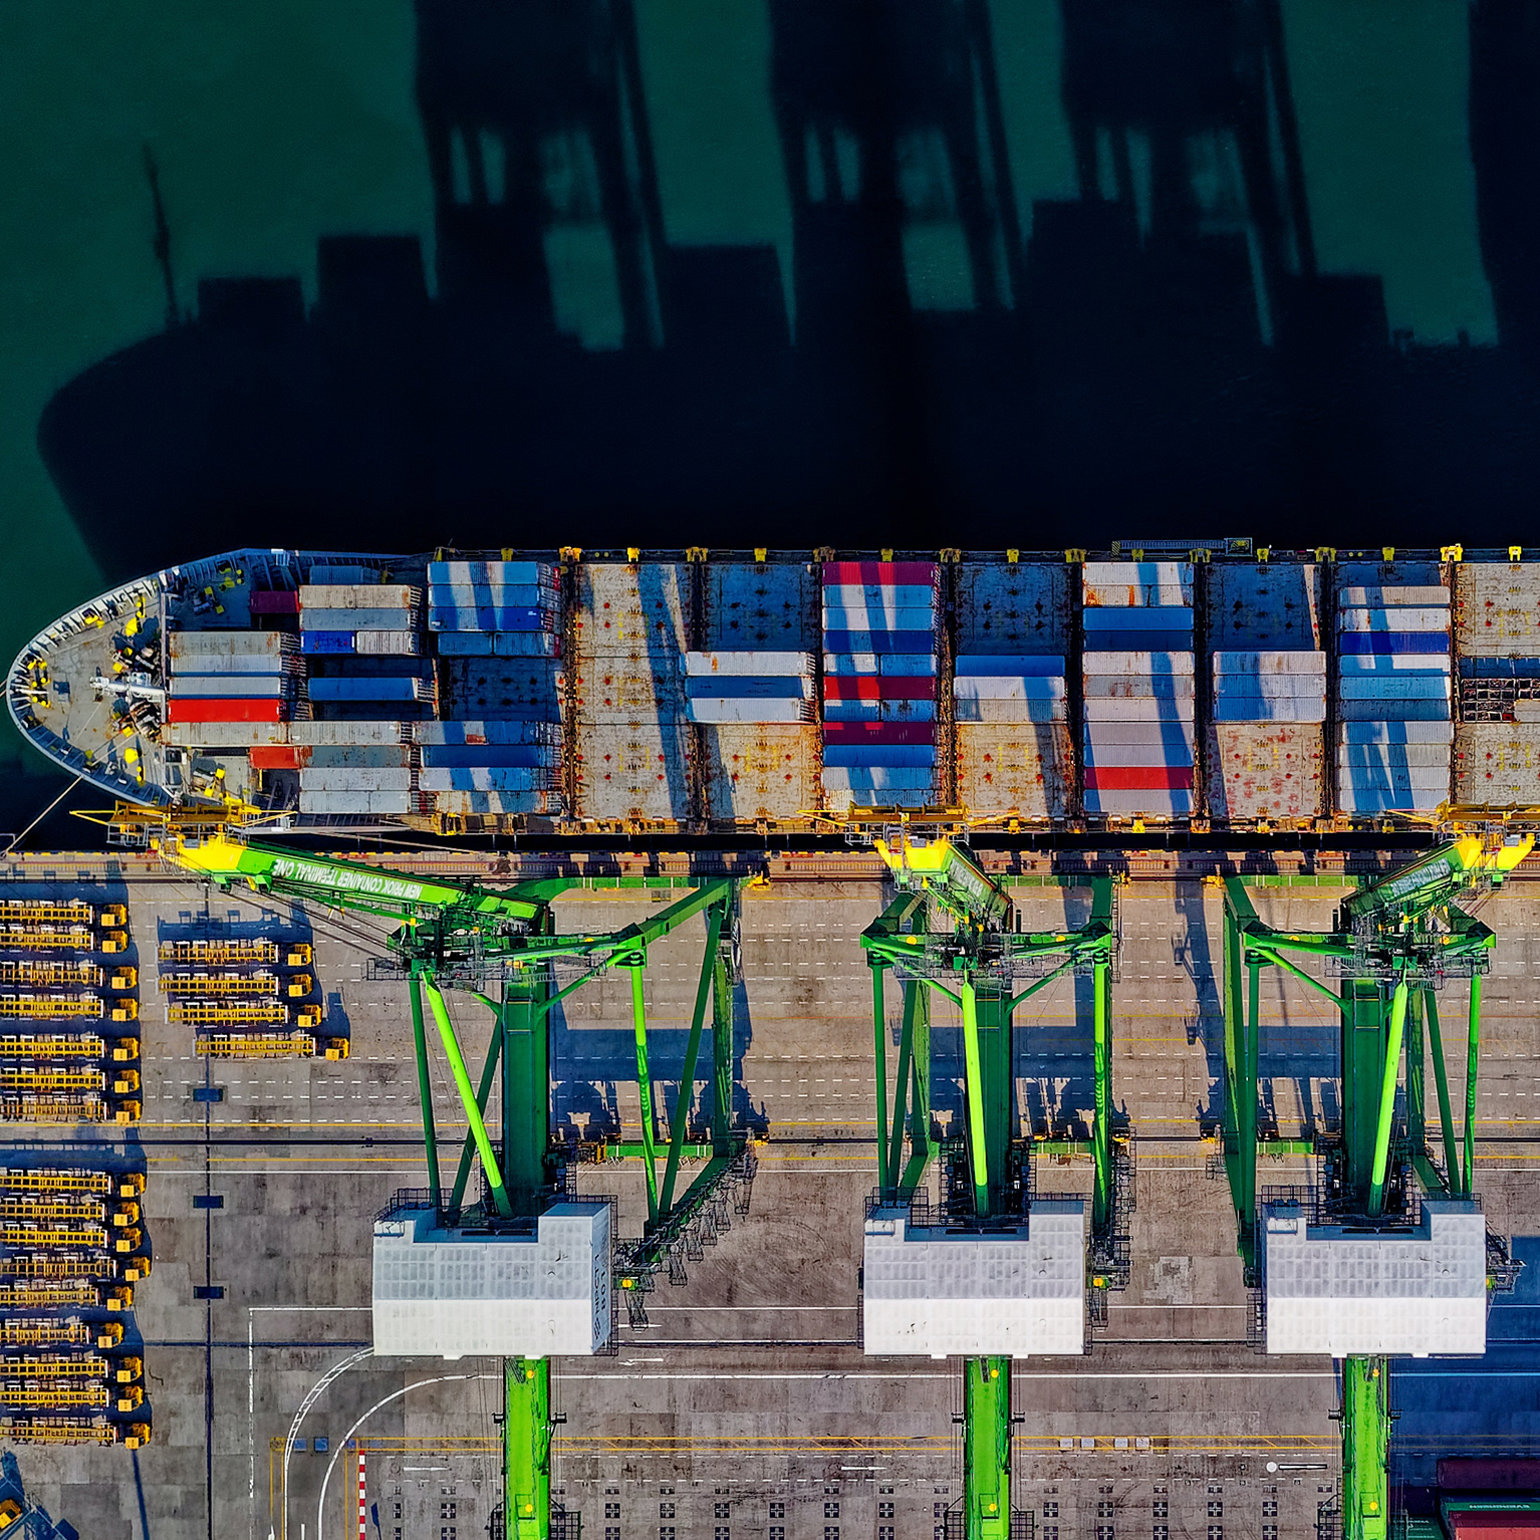 An aerial view of ships at a dockyard with green cranes ready to load them up with containers